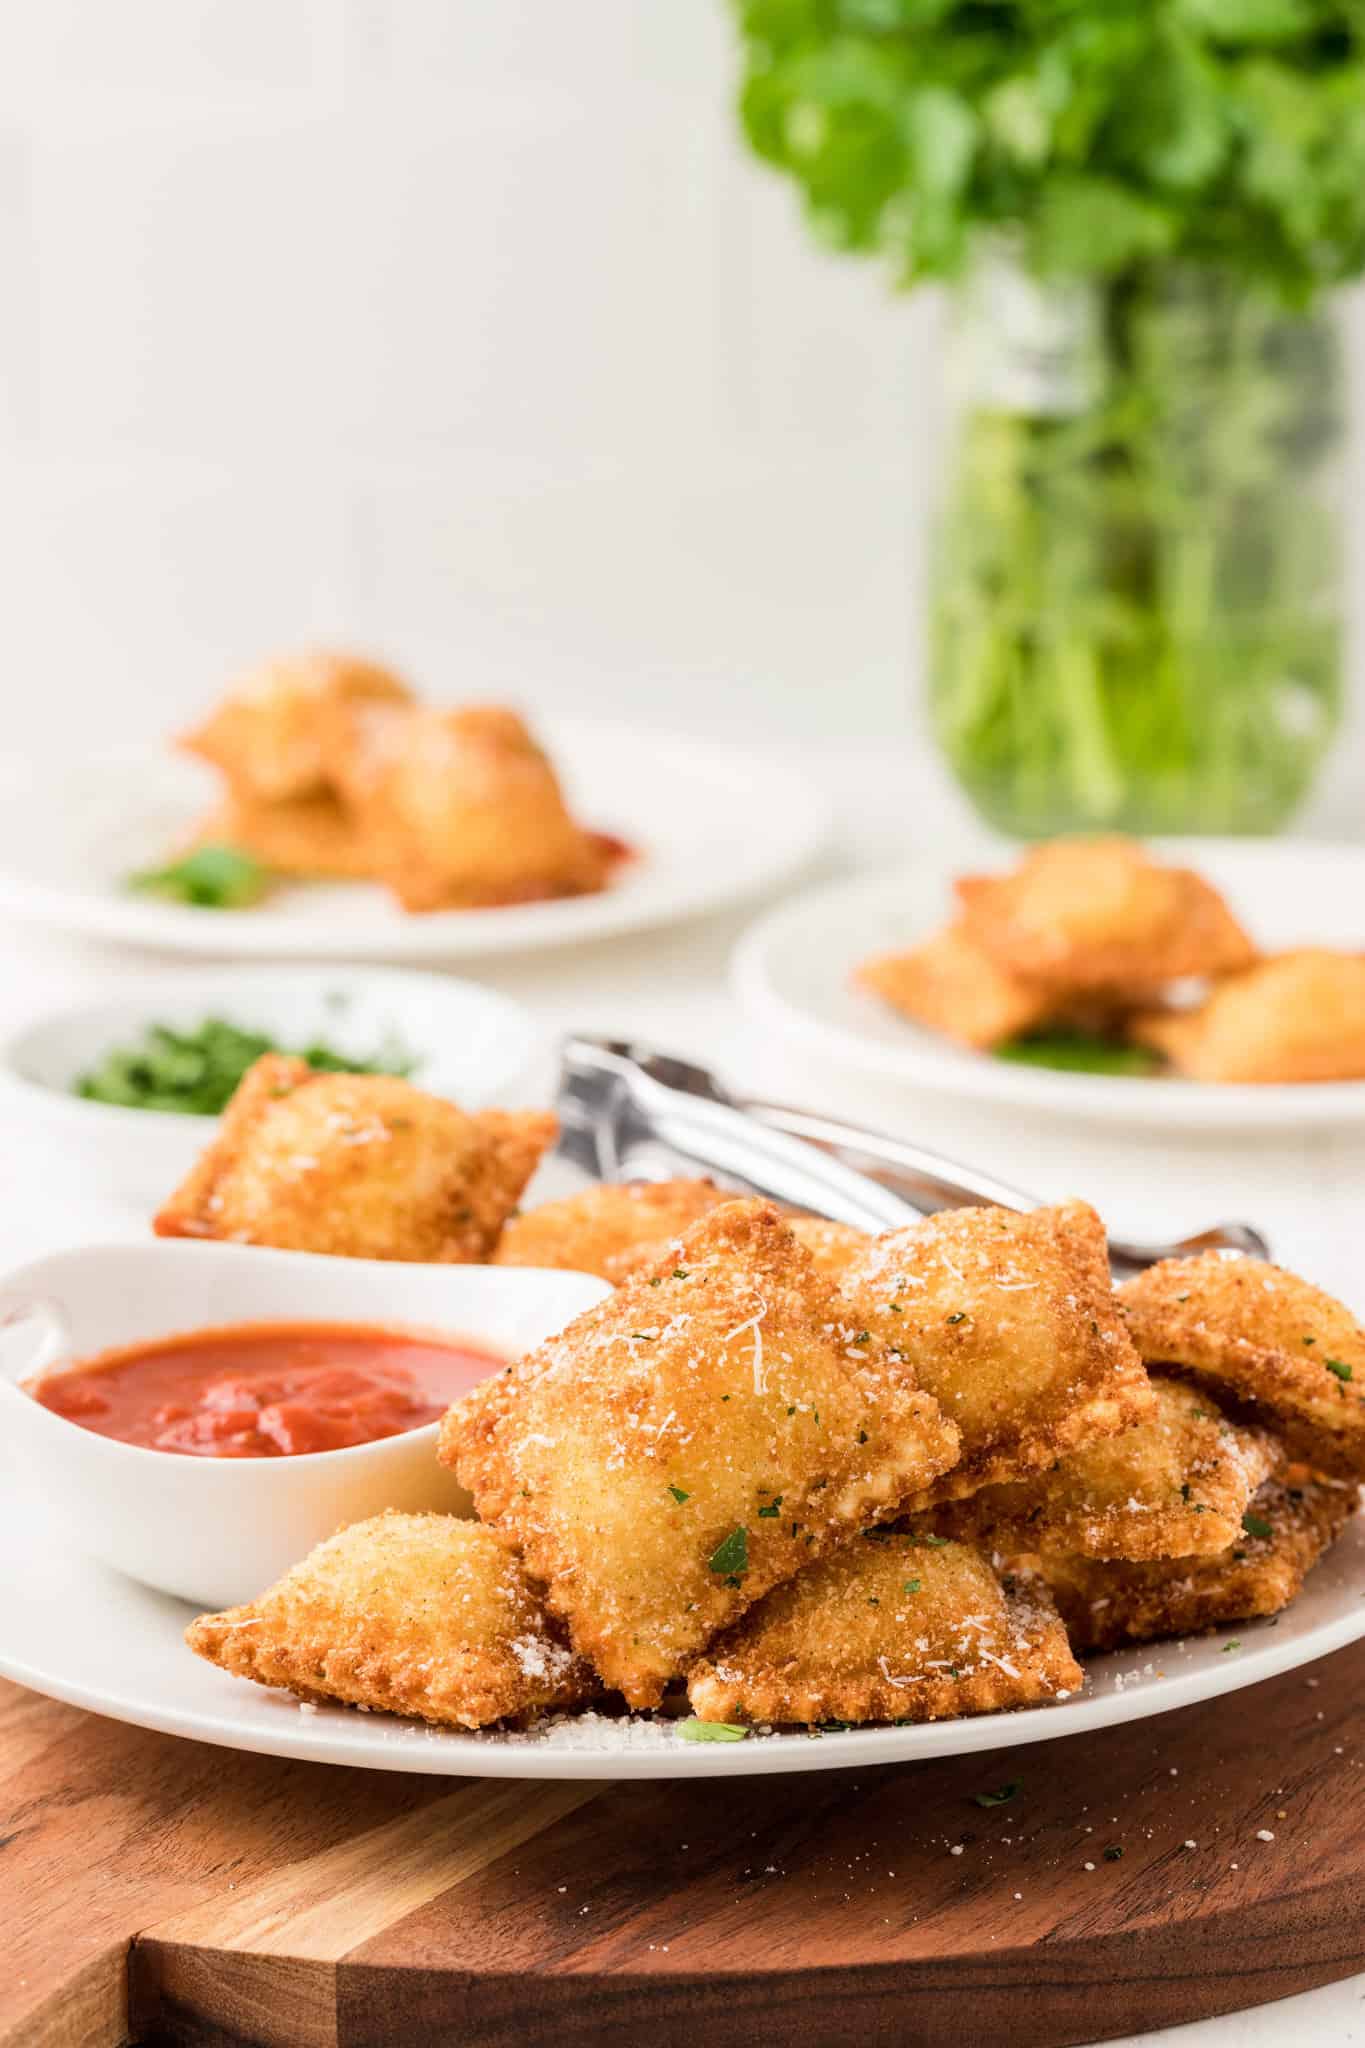 Fried Ravioli are a delicious appetizer made with store bought ravioli coated in an Italian breadcrumb and Parmesan cheese mixture and fried until golden brown and crispy.